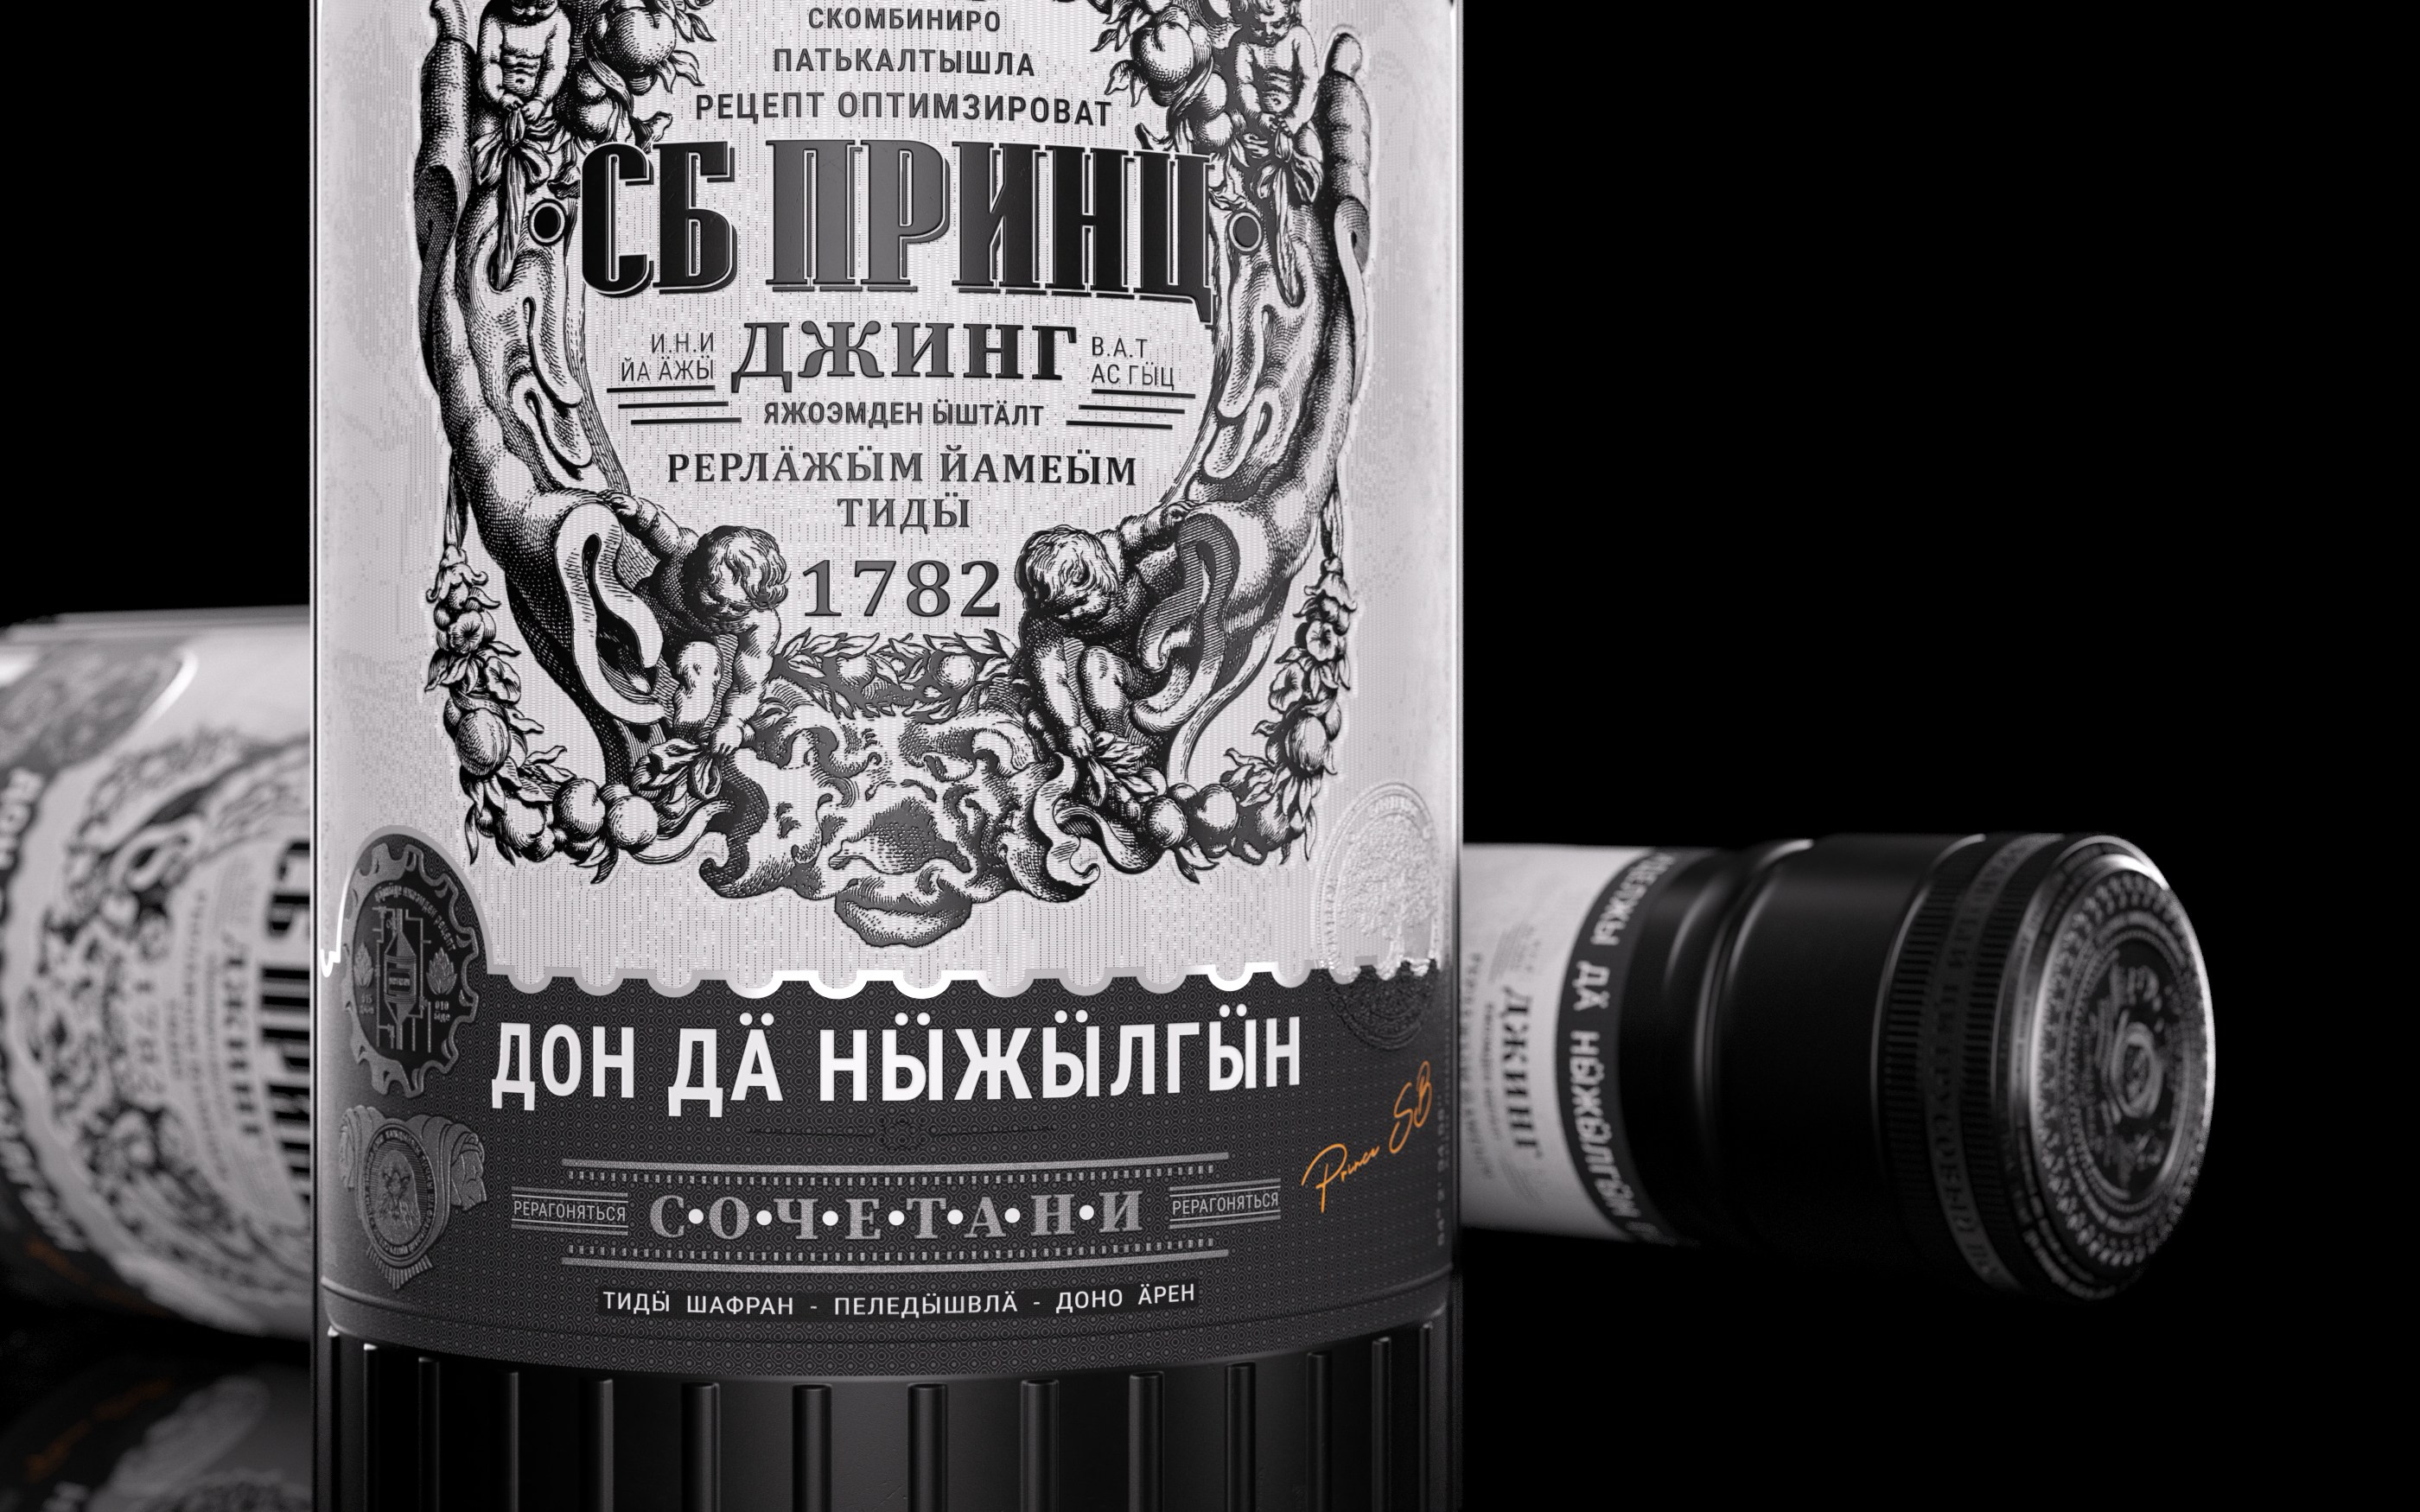 Experience the Luxury of СБ ПРИНЦ Gin: A Sophisticated Gin with a Sleek and Original Bottle Design